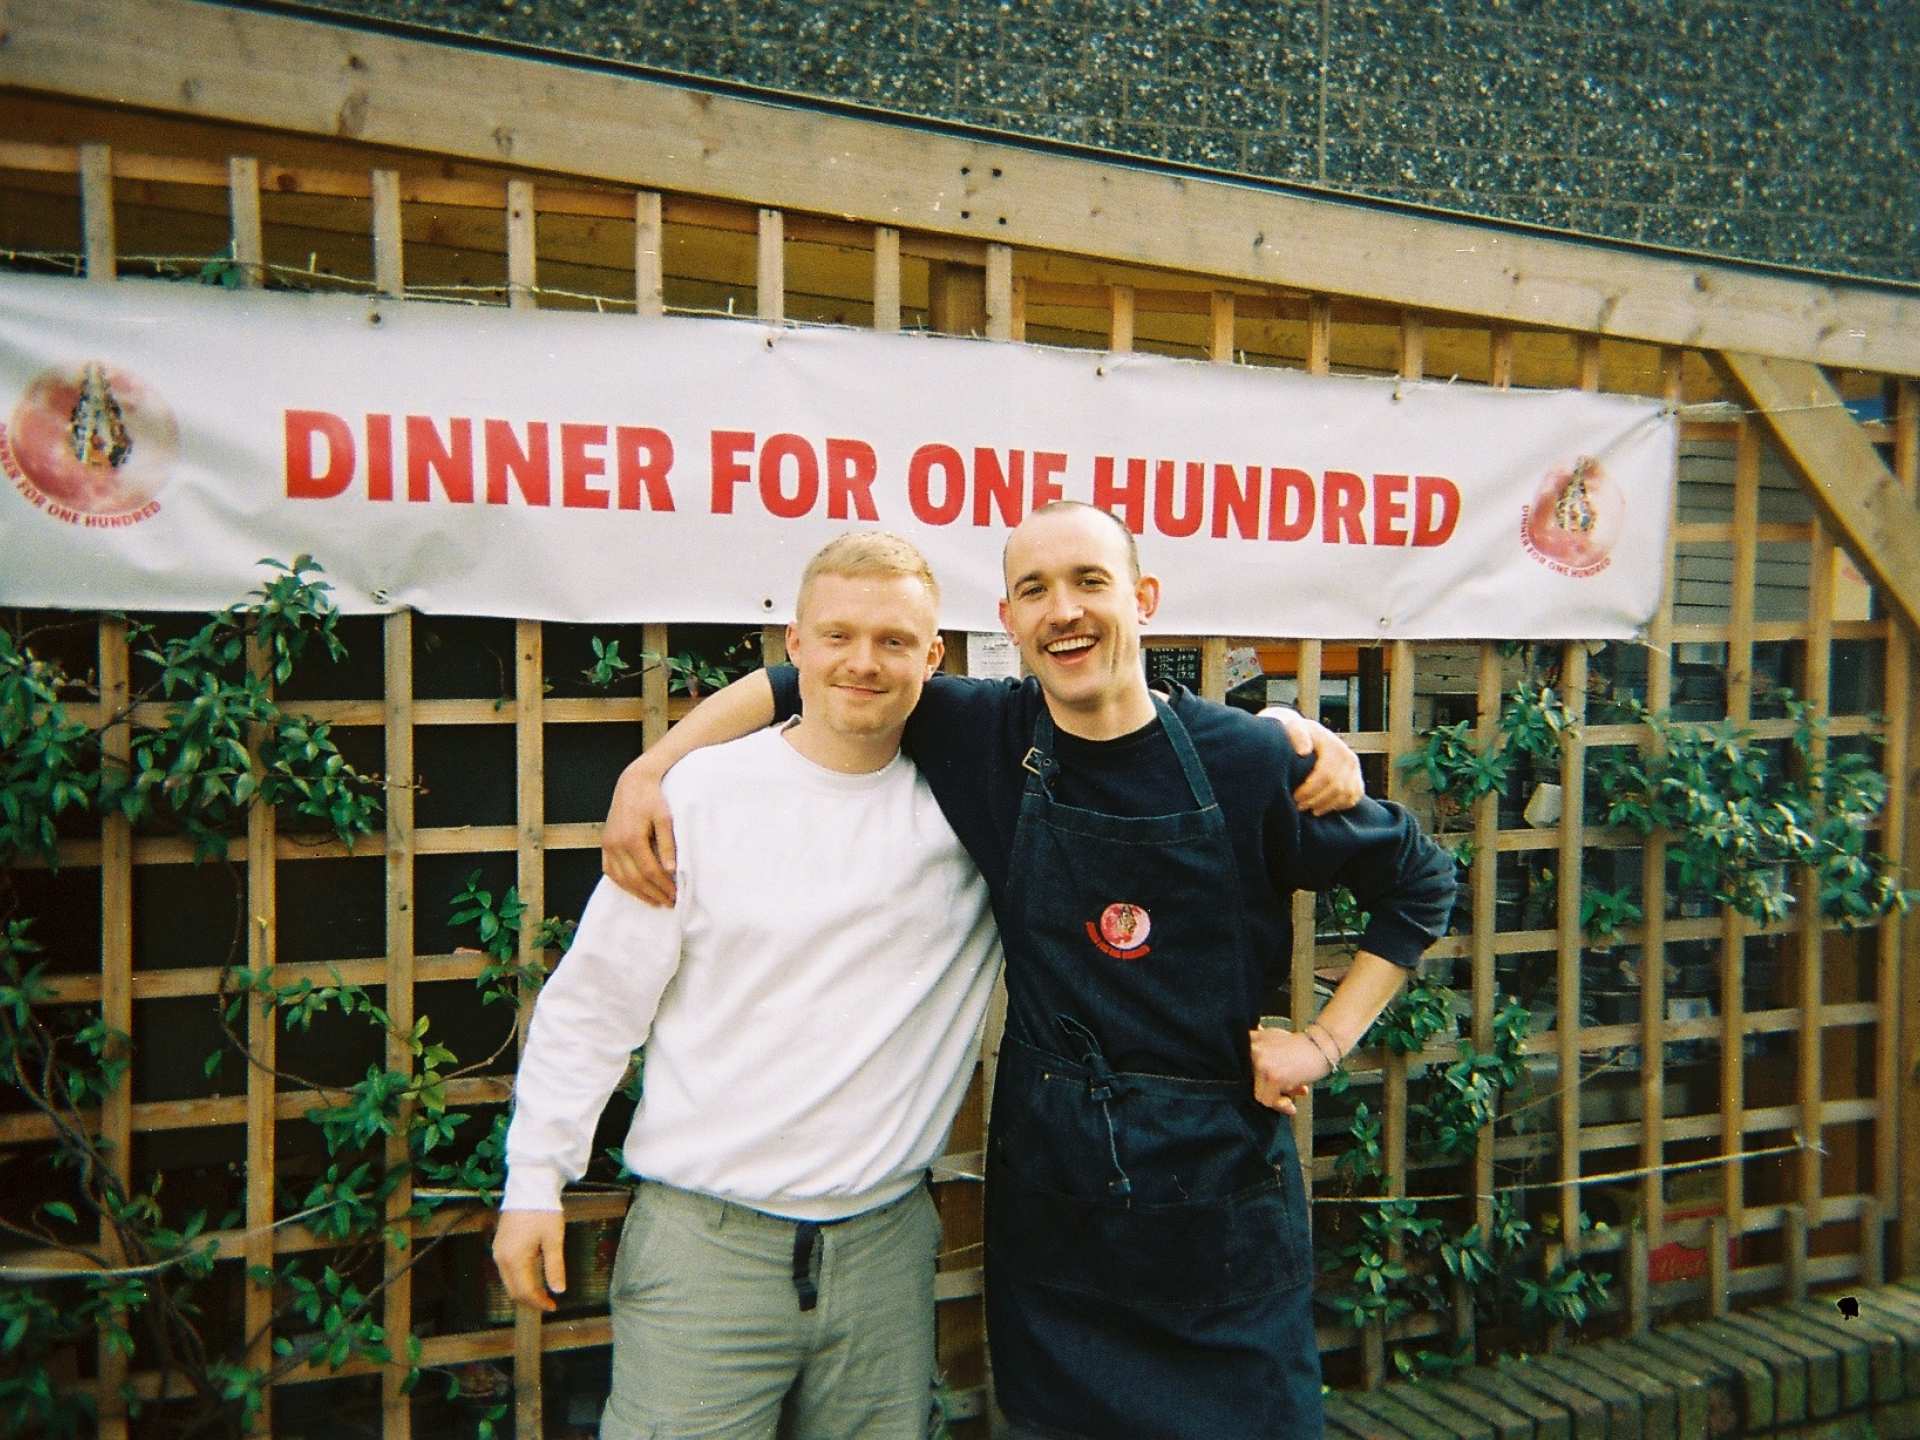 Jake and Jacob, founders of Dinner for One Hundred